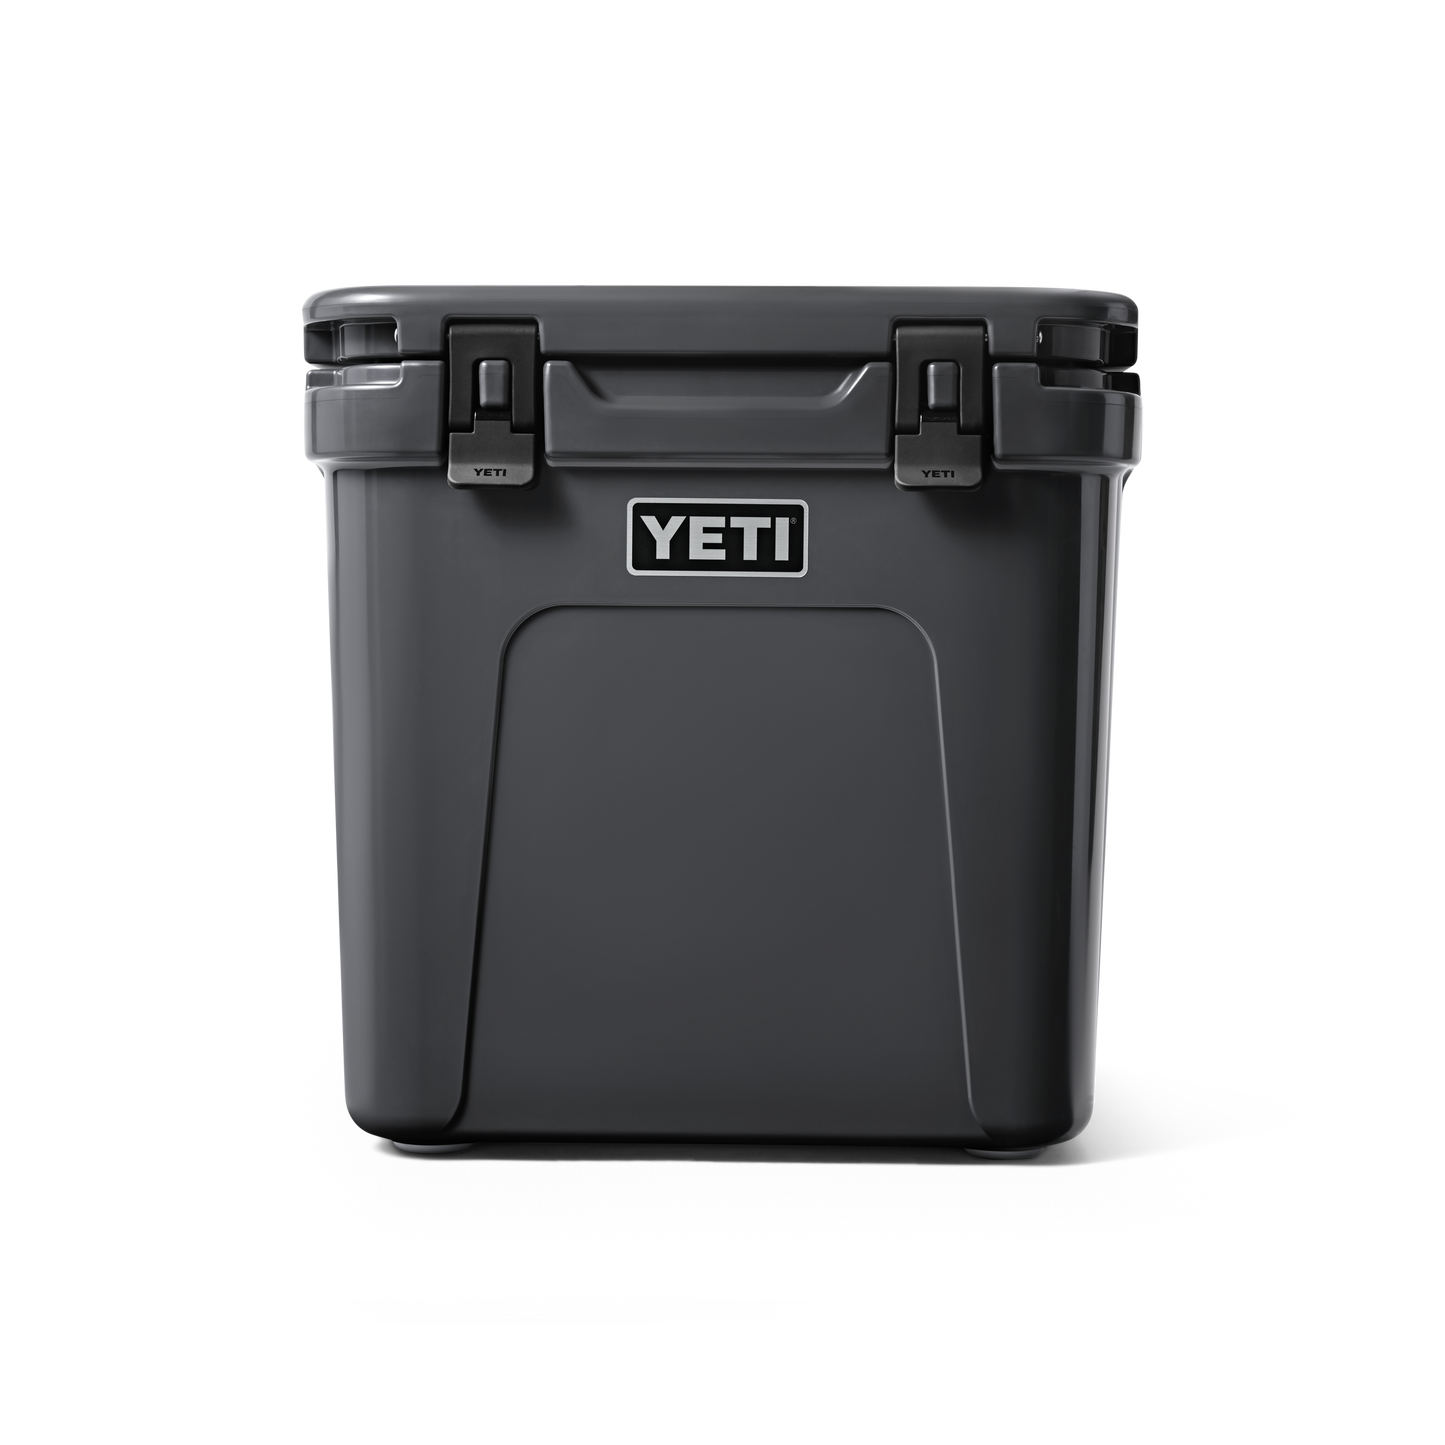 YETI Roadie 48 Wheeled Cool Box in rescue red front